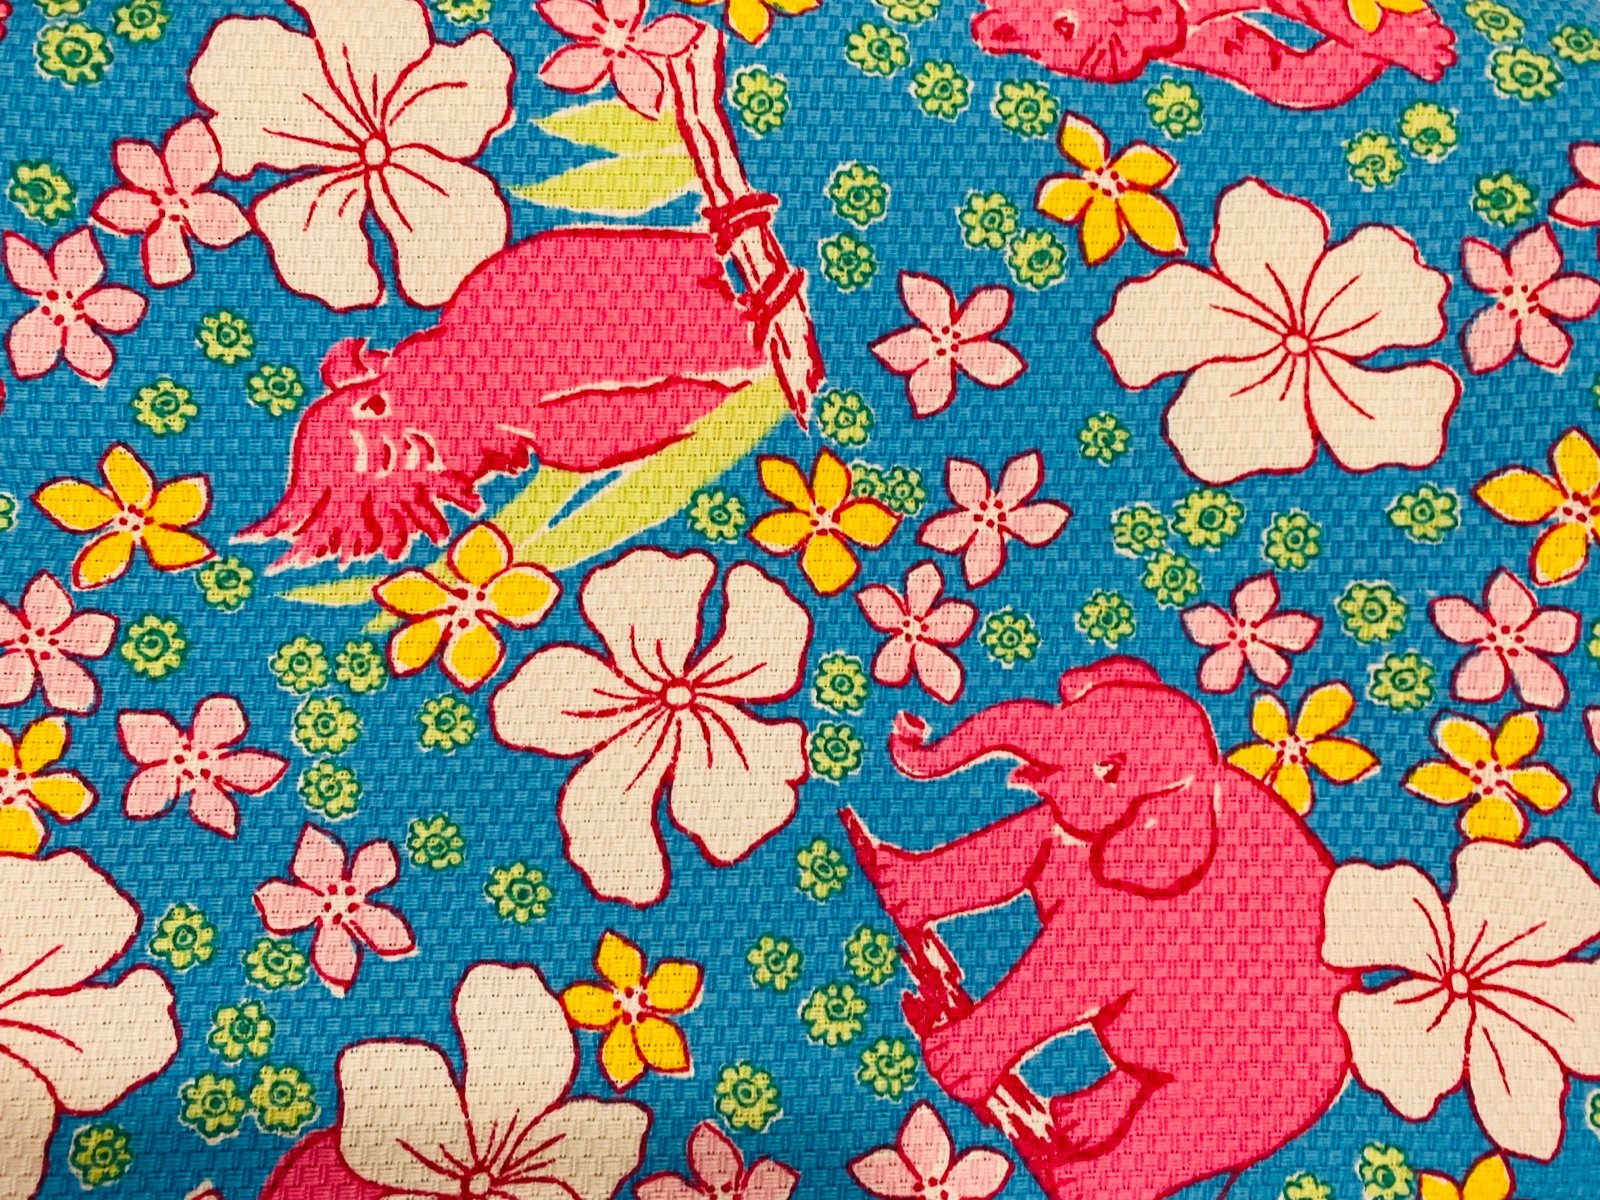 Fabric for sewing projects 7r77VREf8